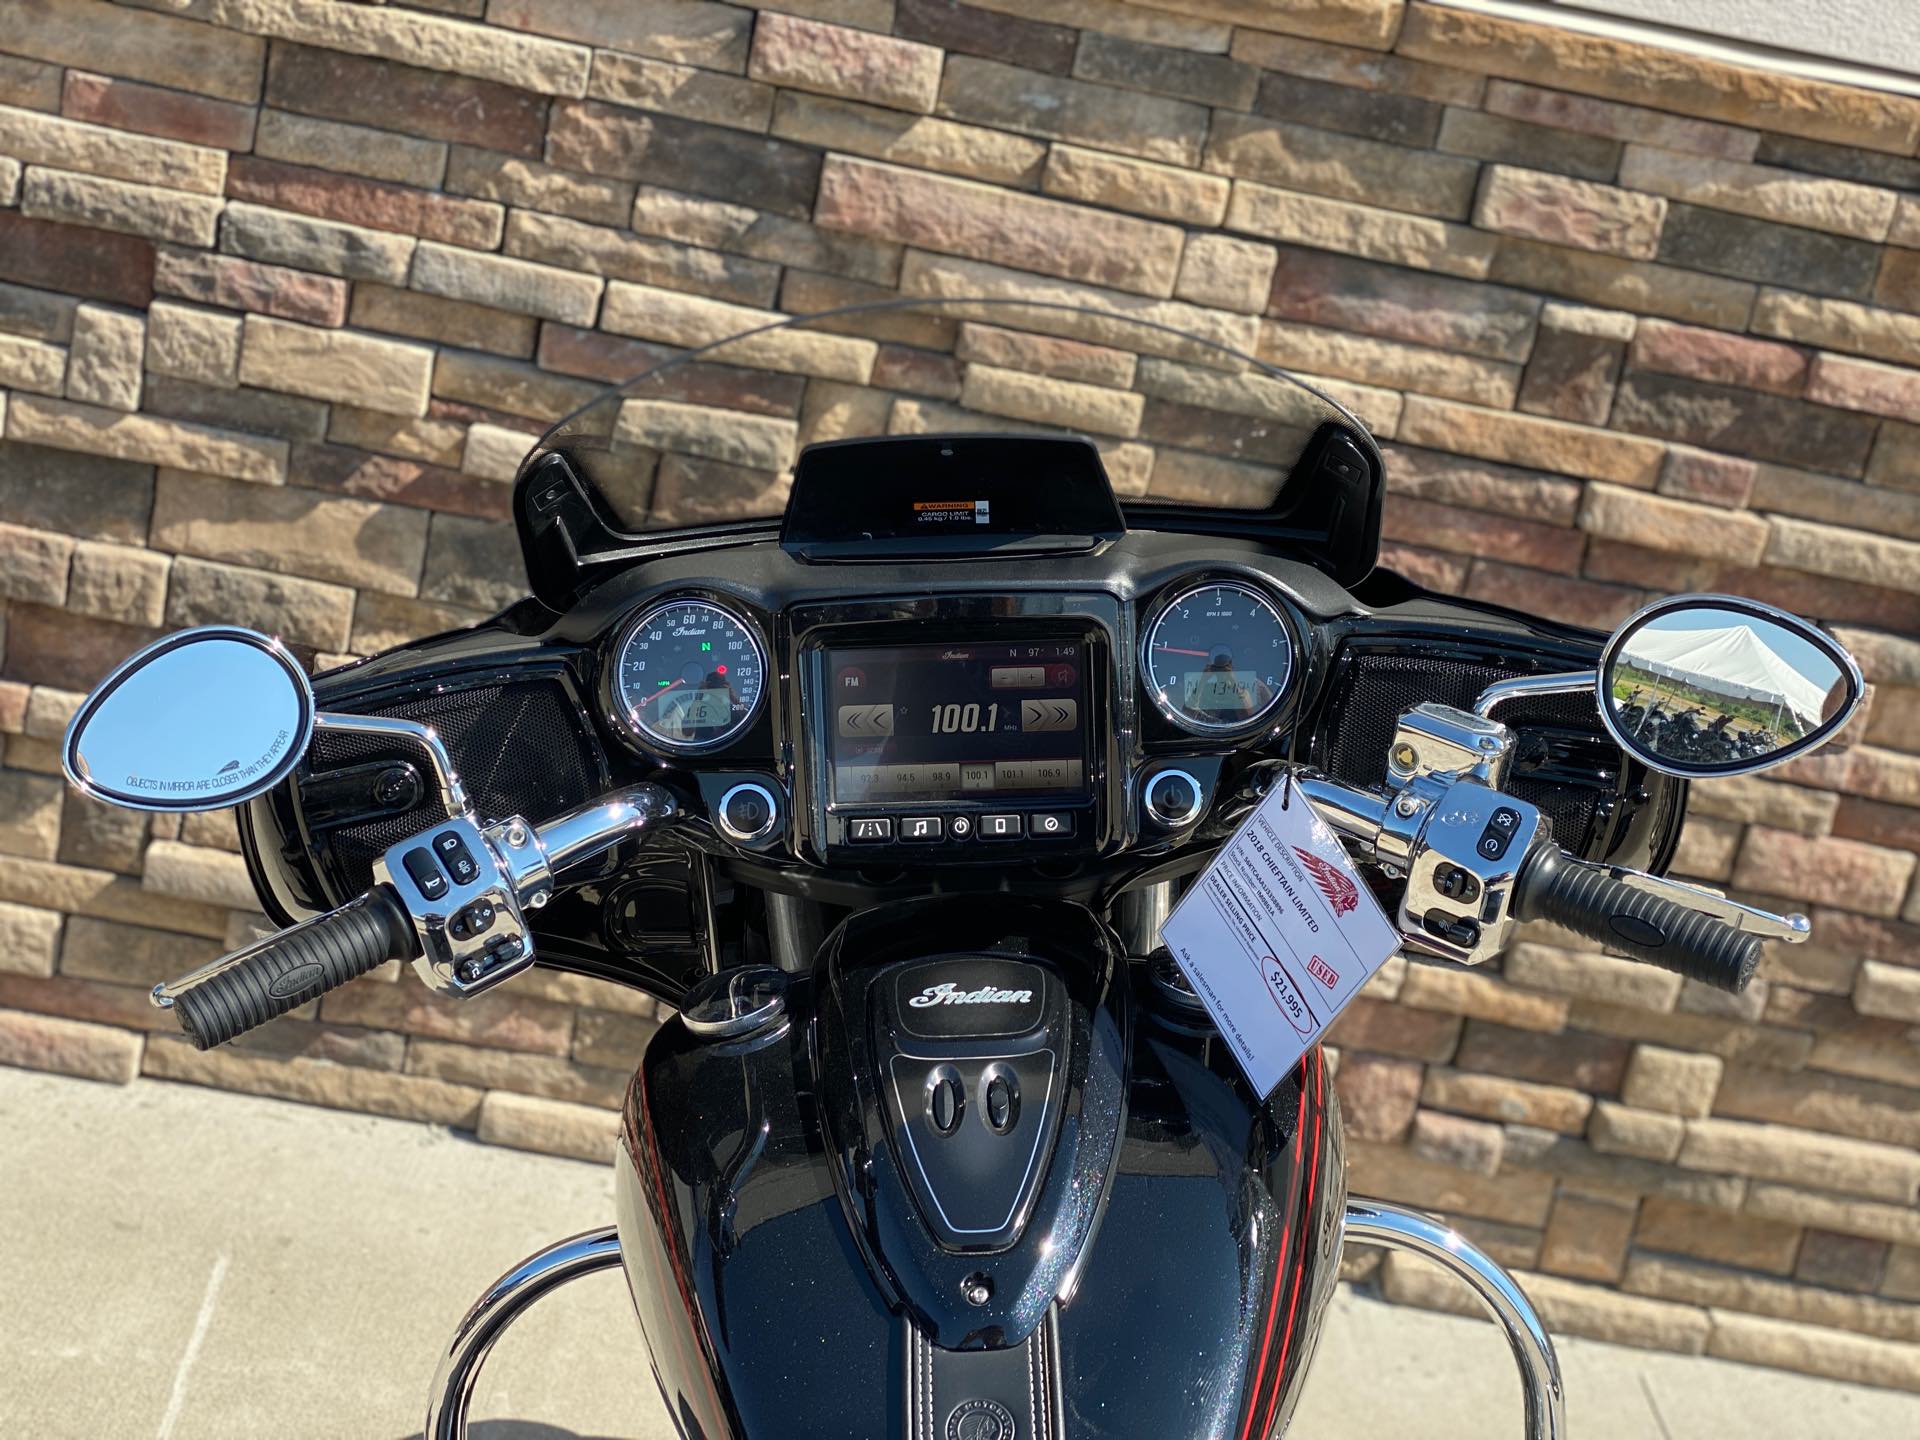 2018 Indian Chieftain Limited at Head Indian Motorcycle